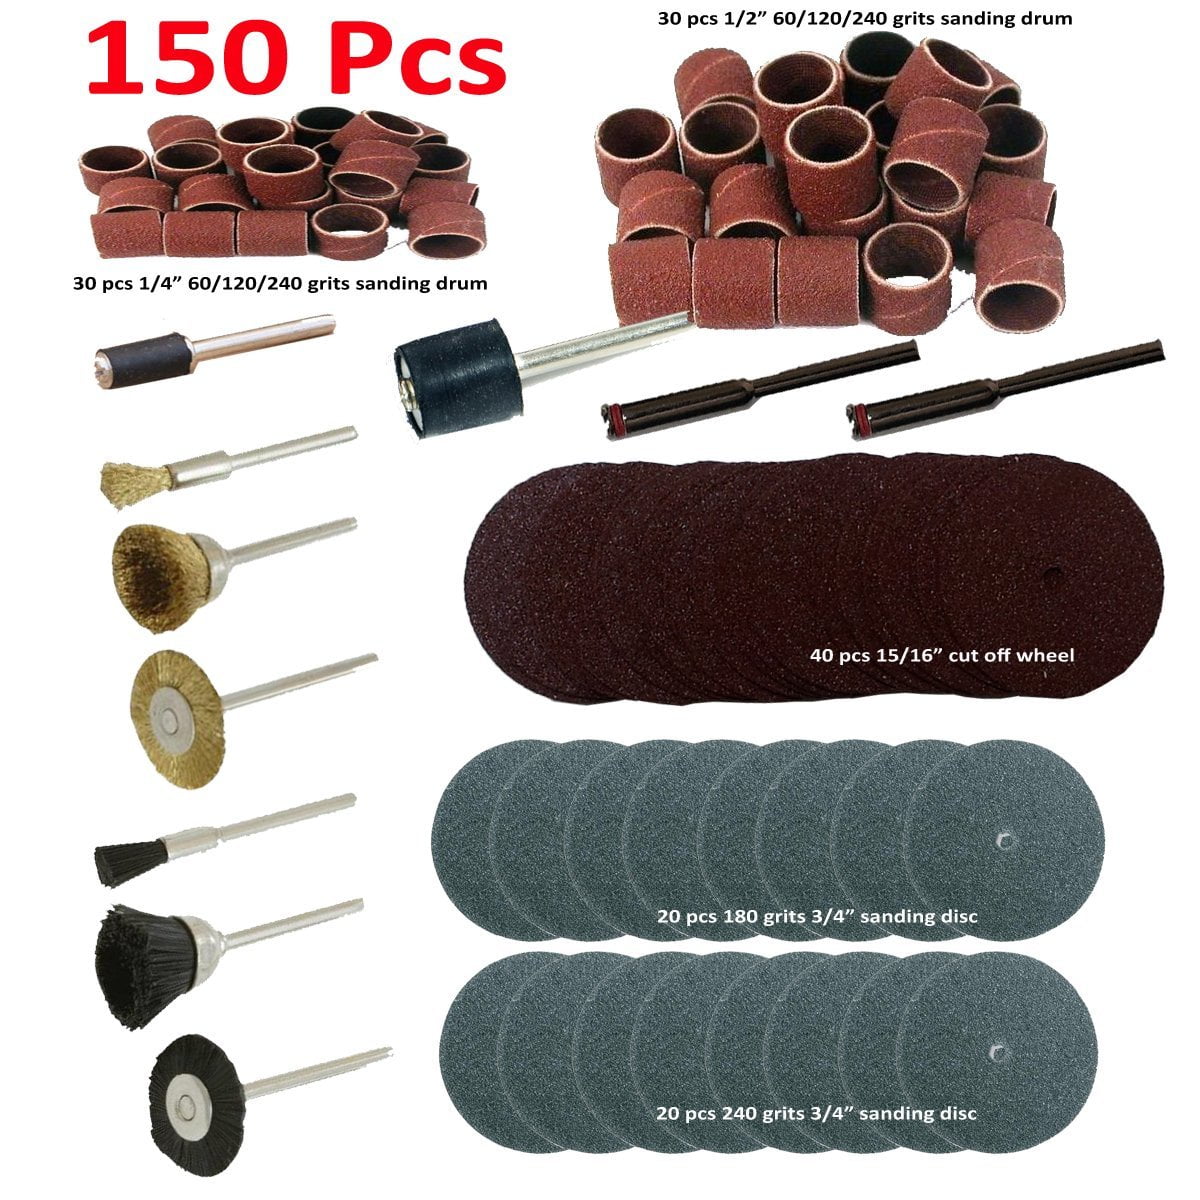 Details about   150PCs Dremel Sanding Band Sleeves Drum Kits For Cutting Grinding Rotary Set 